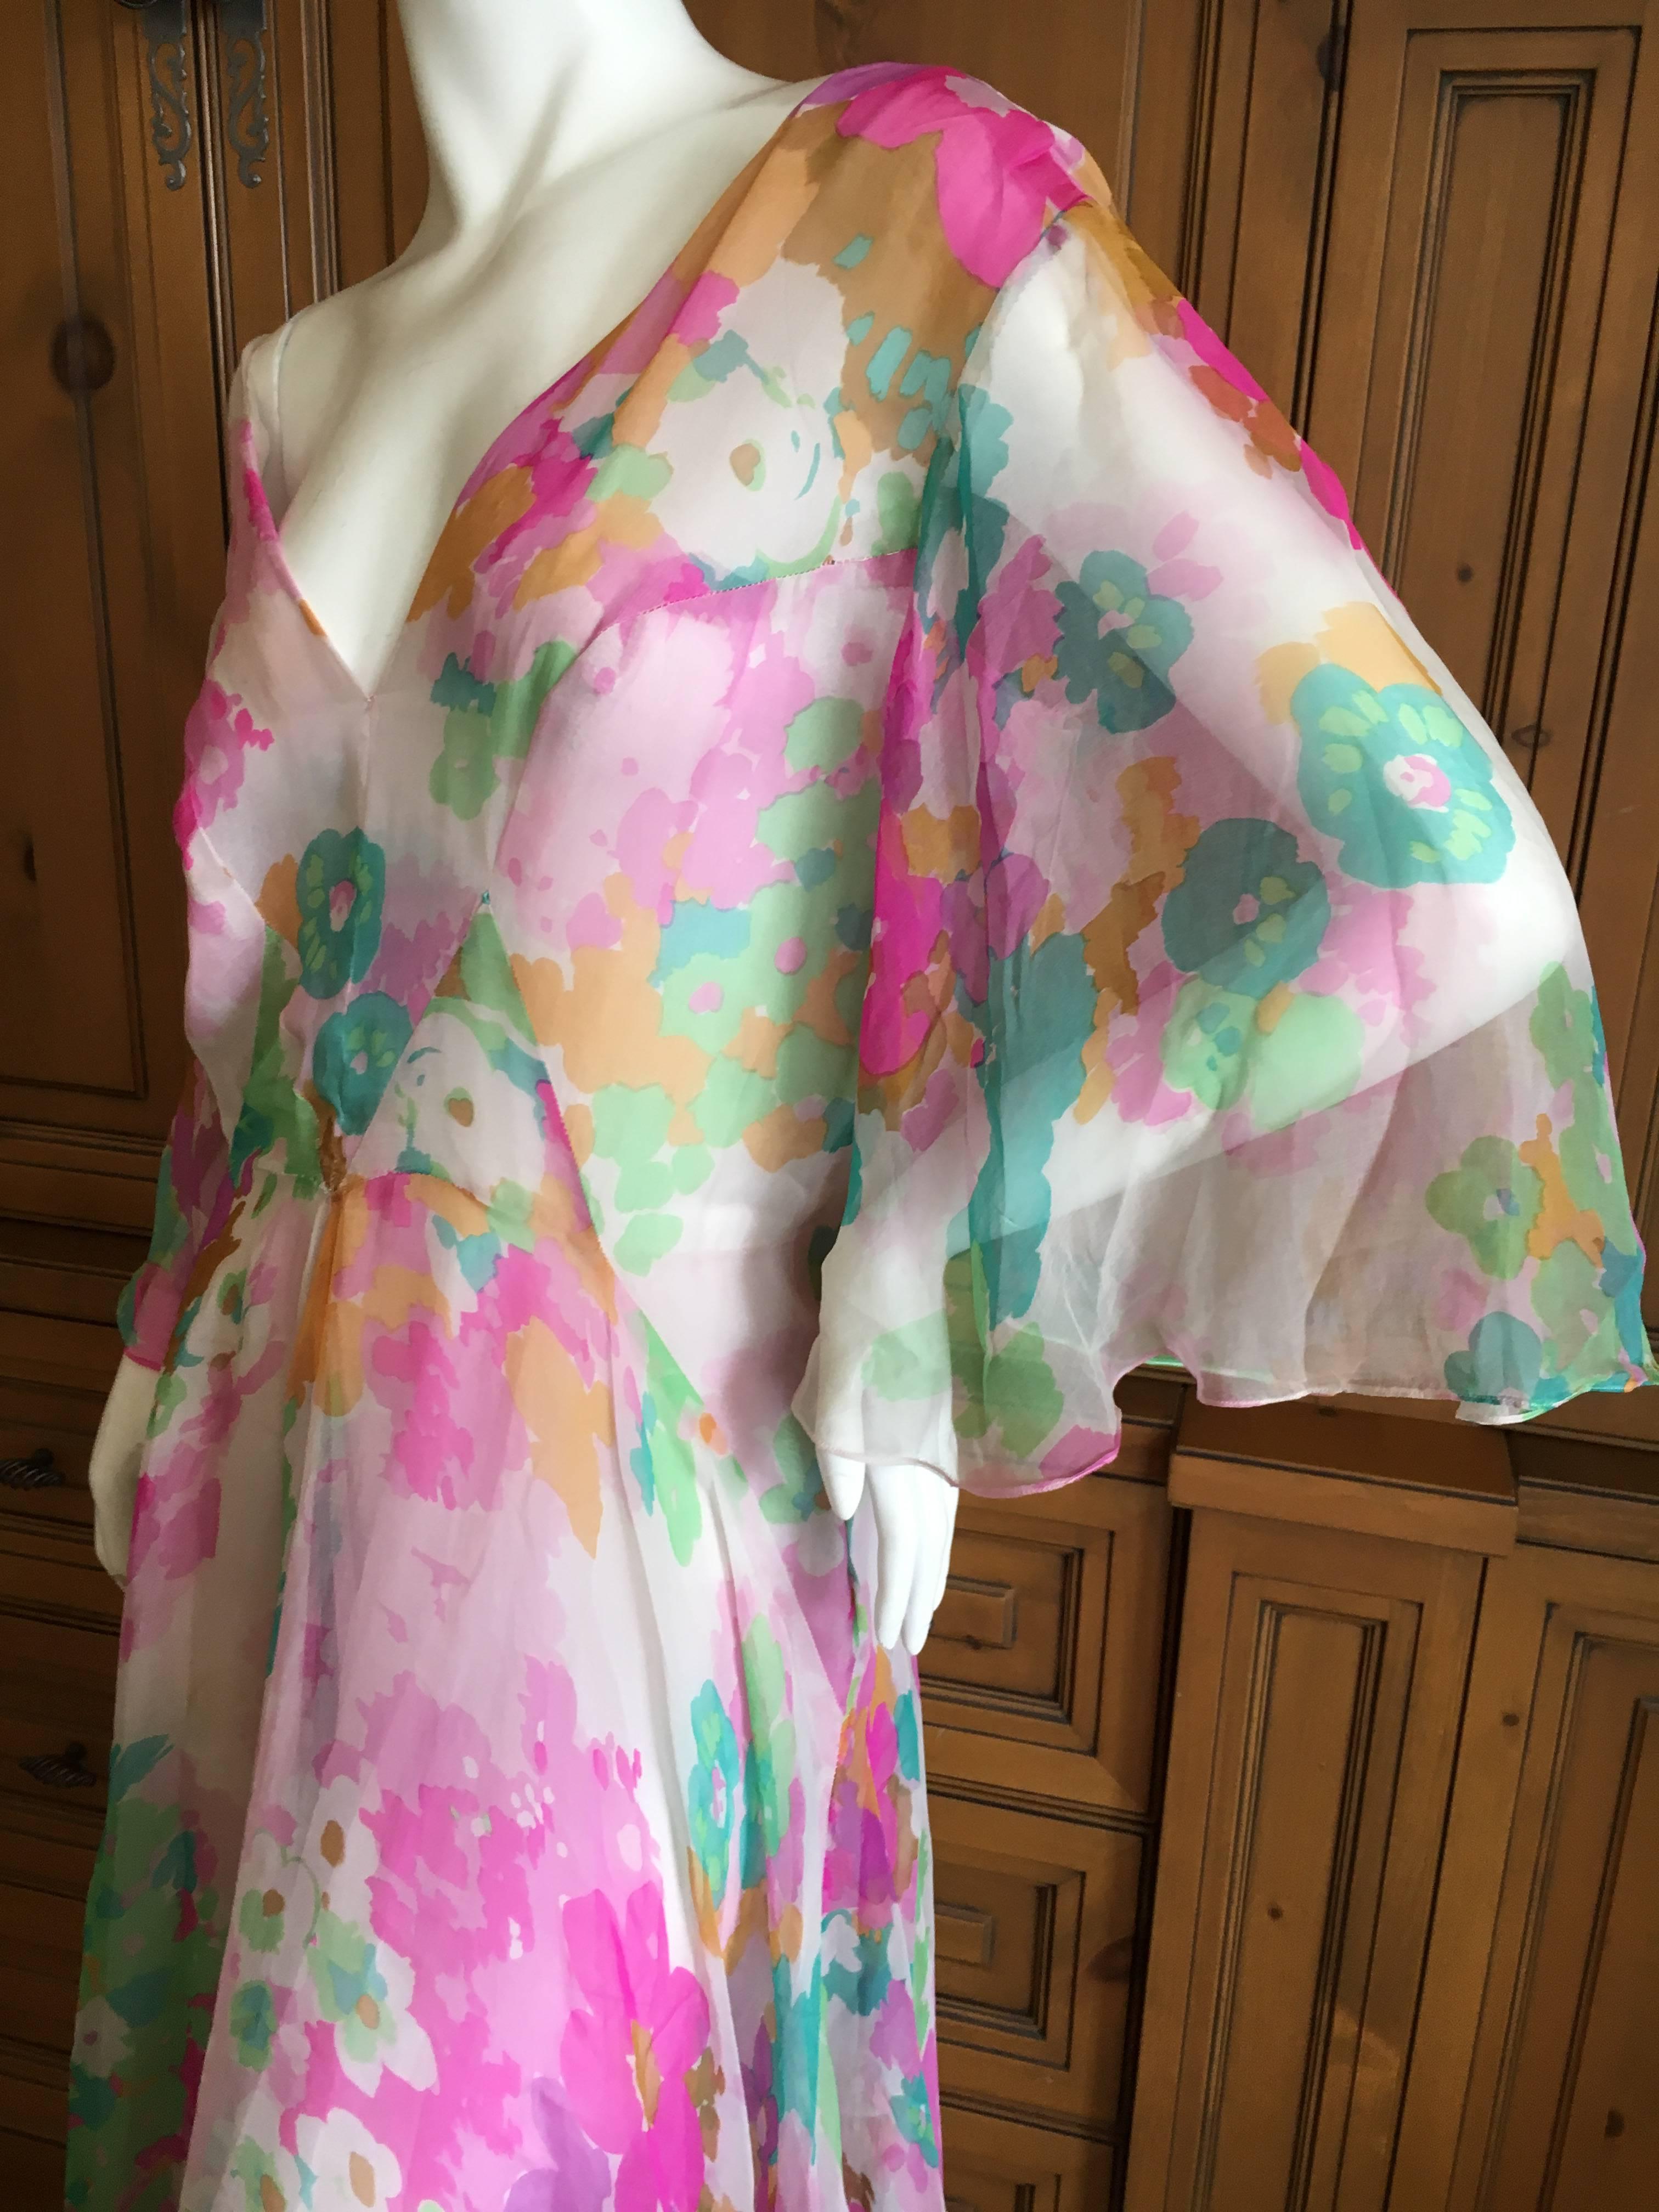 Christian Dior 1960's Demi Couture Numbered Low Cut Floral Silk Chiffon Dress In Excellent Condition For Sale In Cloverdale, CA